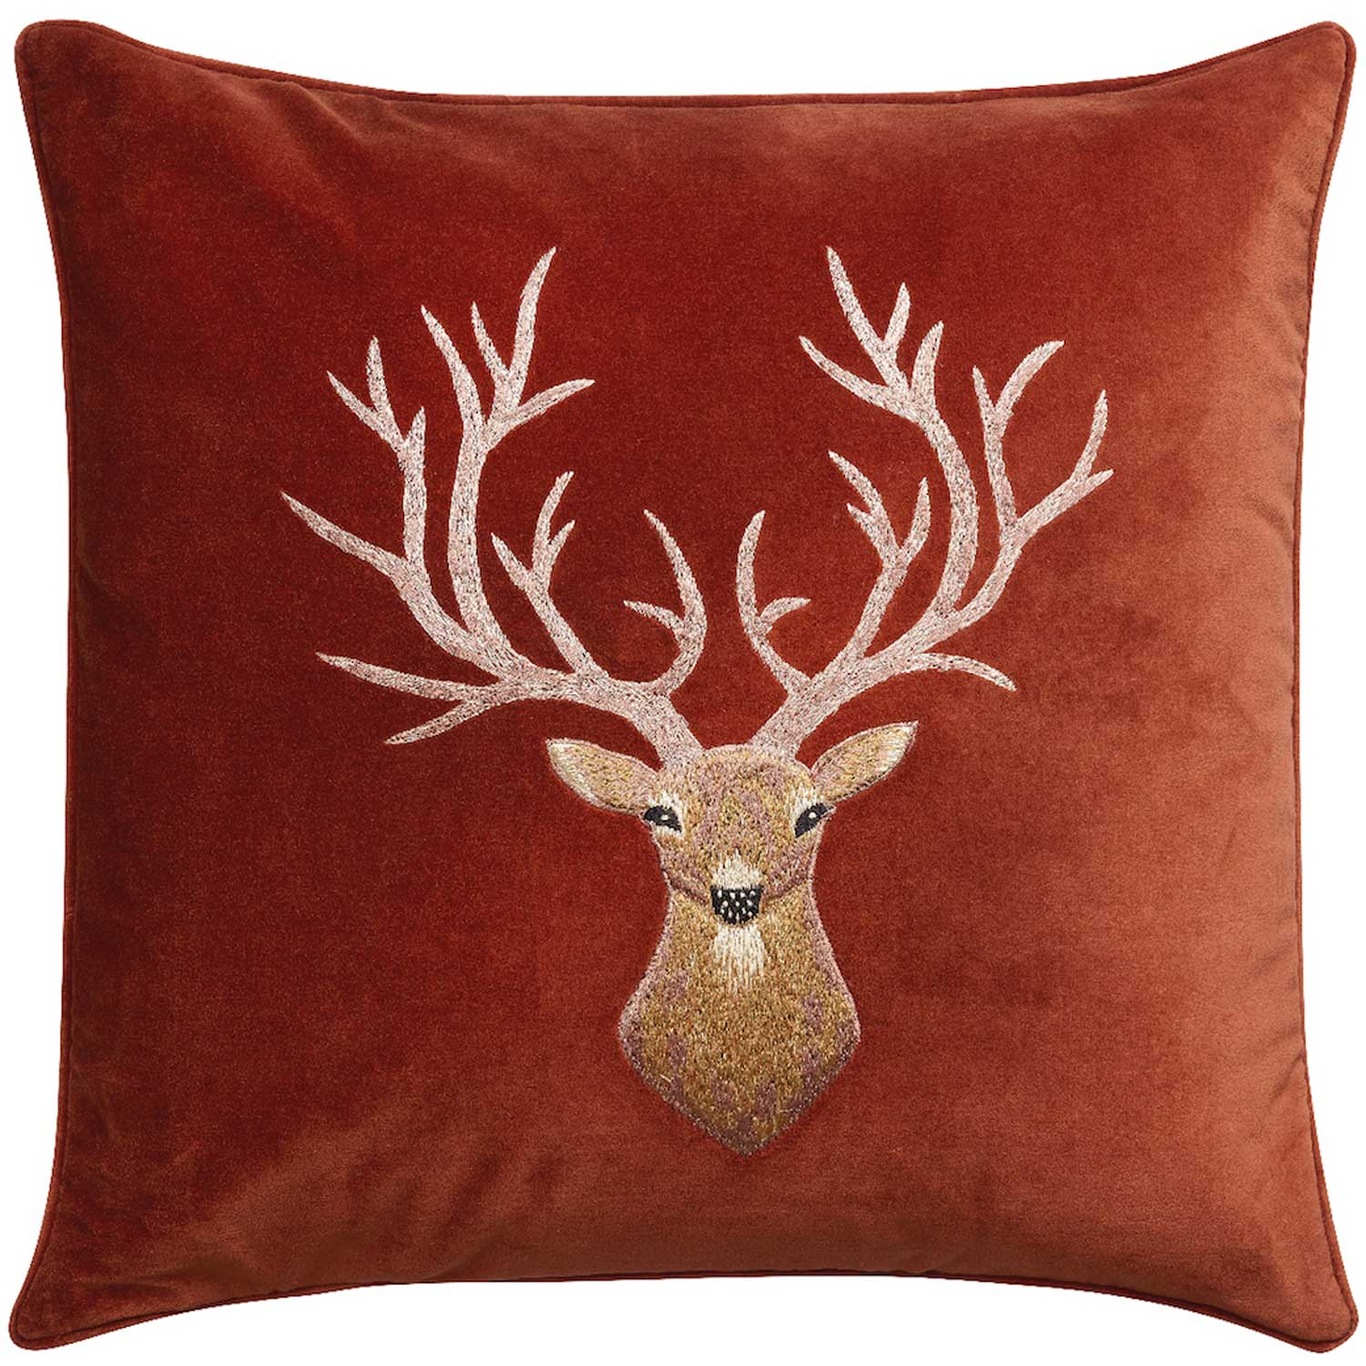 Reindeer Cushion Cover 50x50 cm, Rust Red